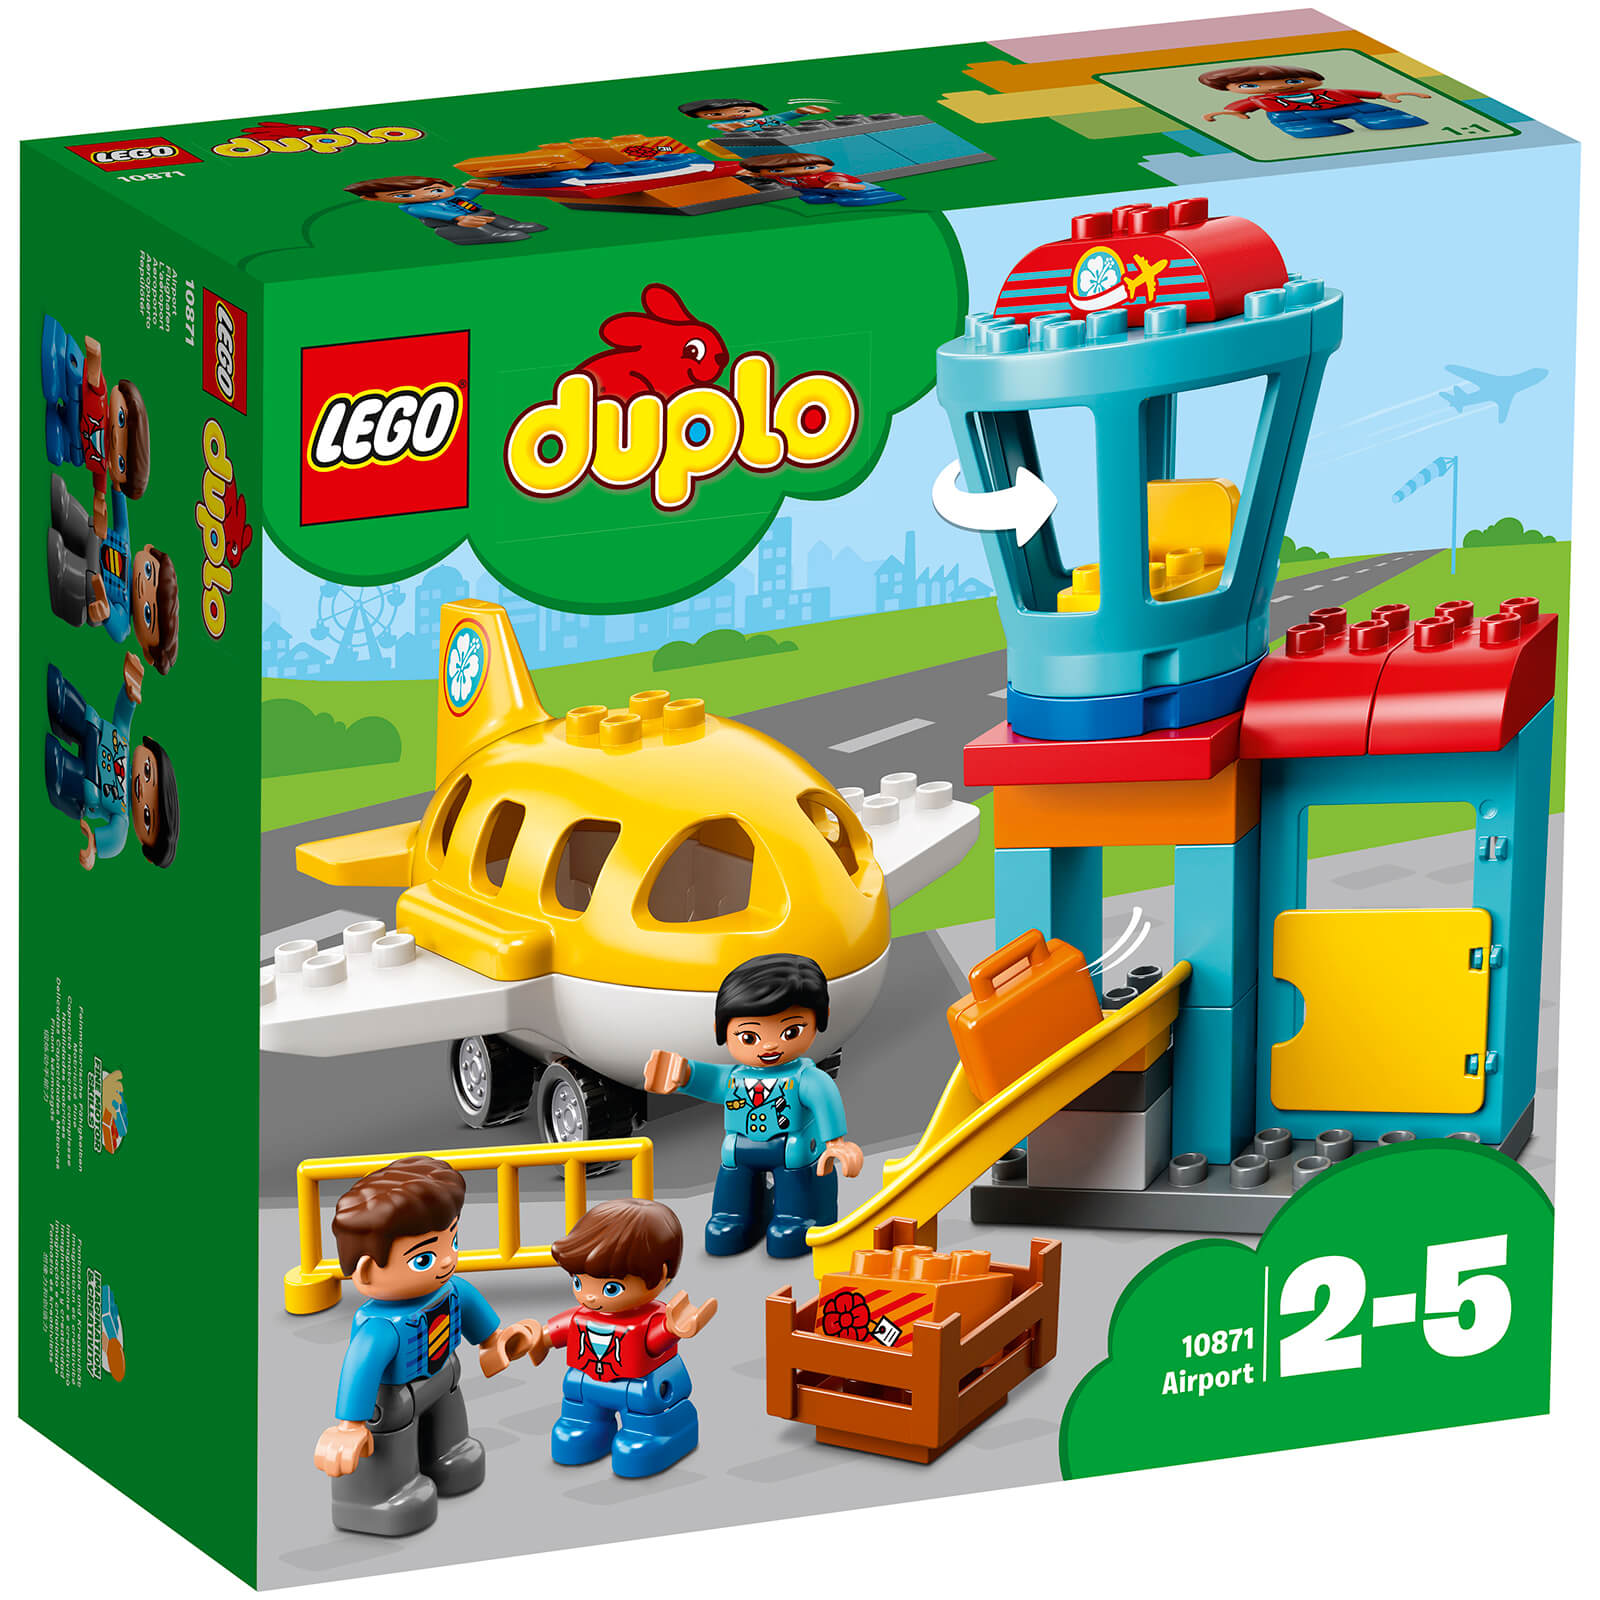 LEGO DUPLO My Town Airport Building Set with Airplane (10871)